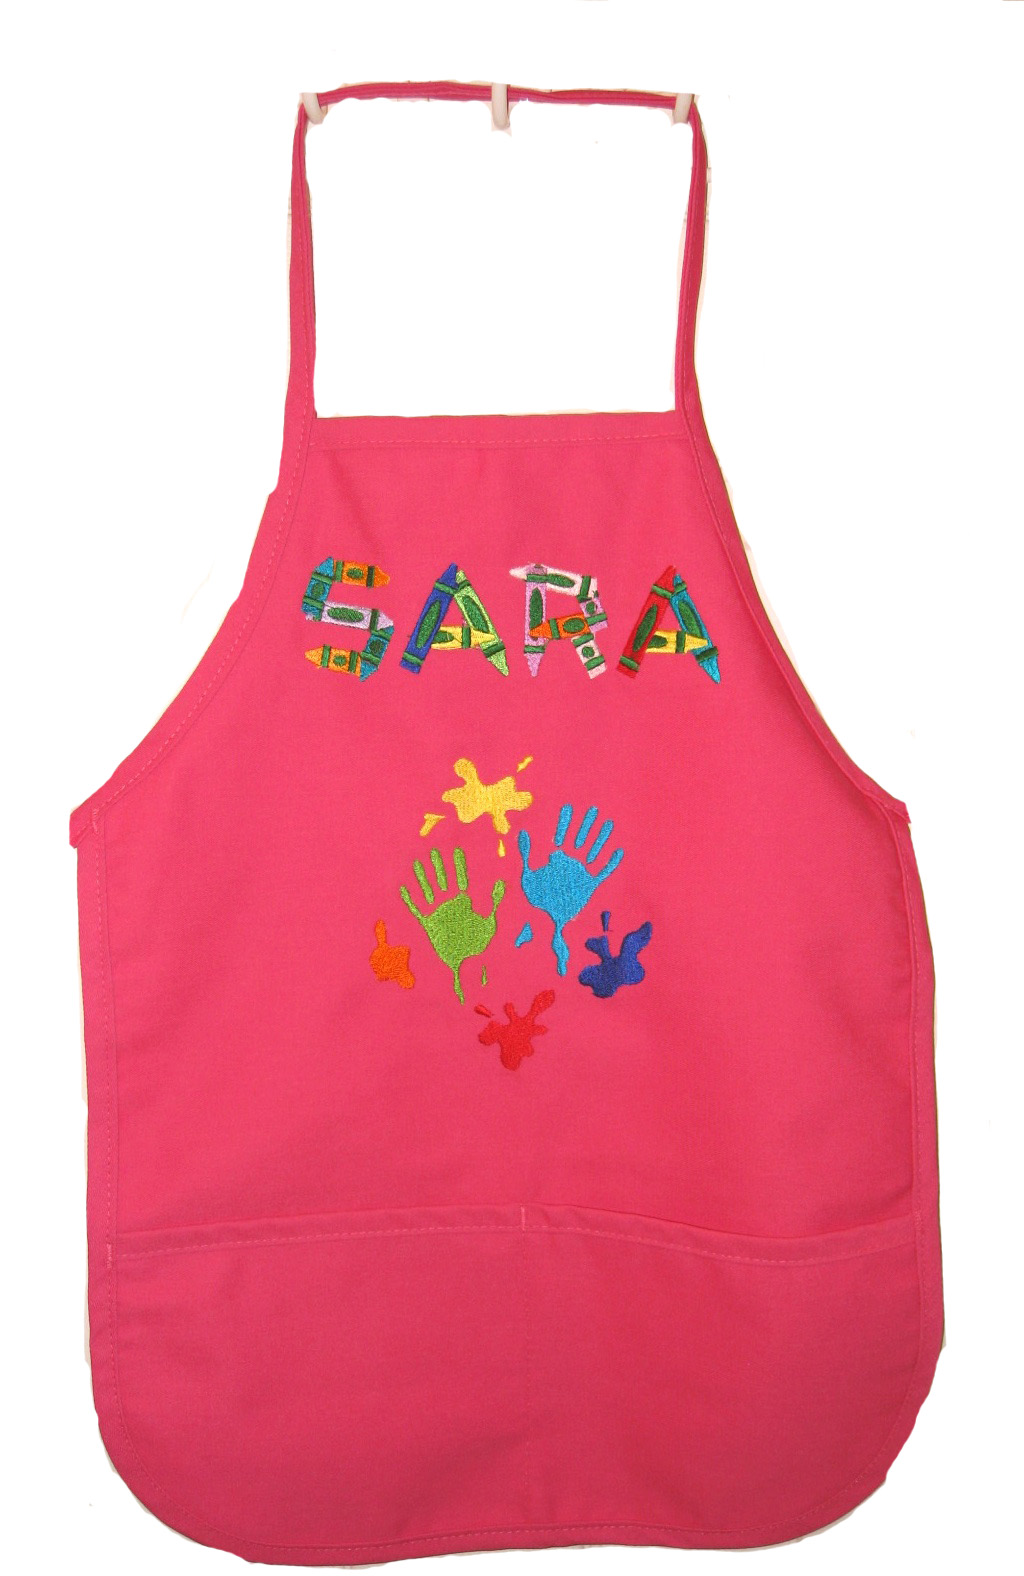 Best Seller Monogrammed Child Apron with Pockets, More Colors, Add a Design